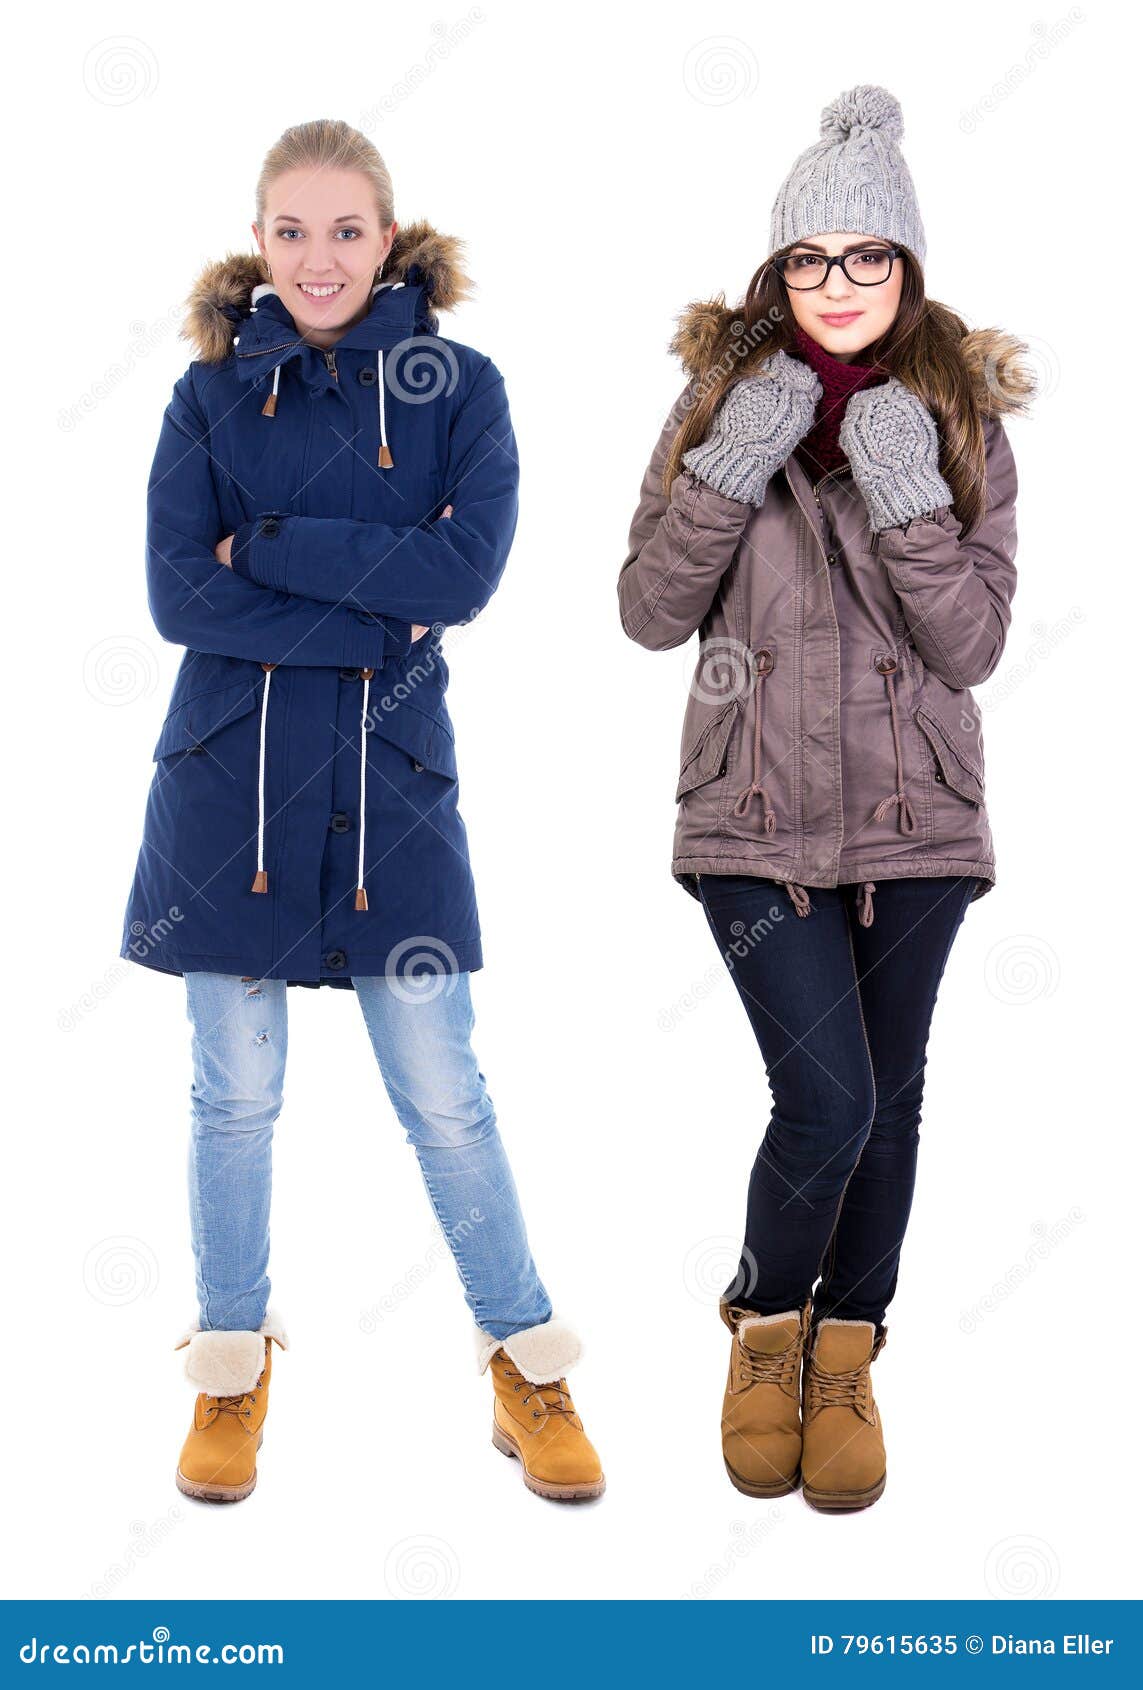 Full Length Portrait of Two Young Women in Winter Clothes Isolated on White  Stock Image - Image of caucasian, glasses: 79615635